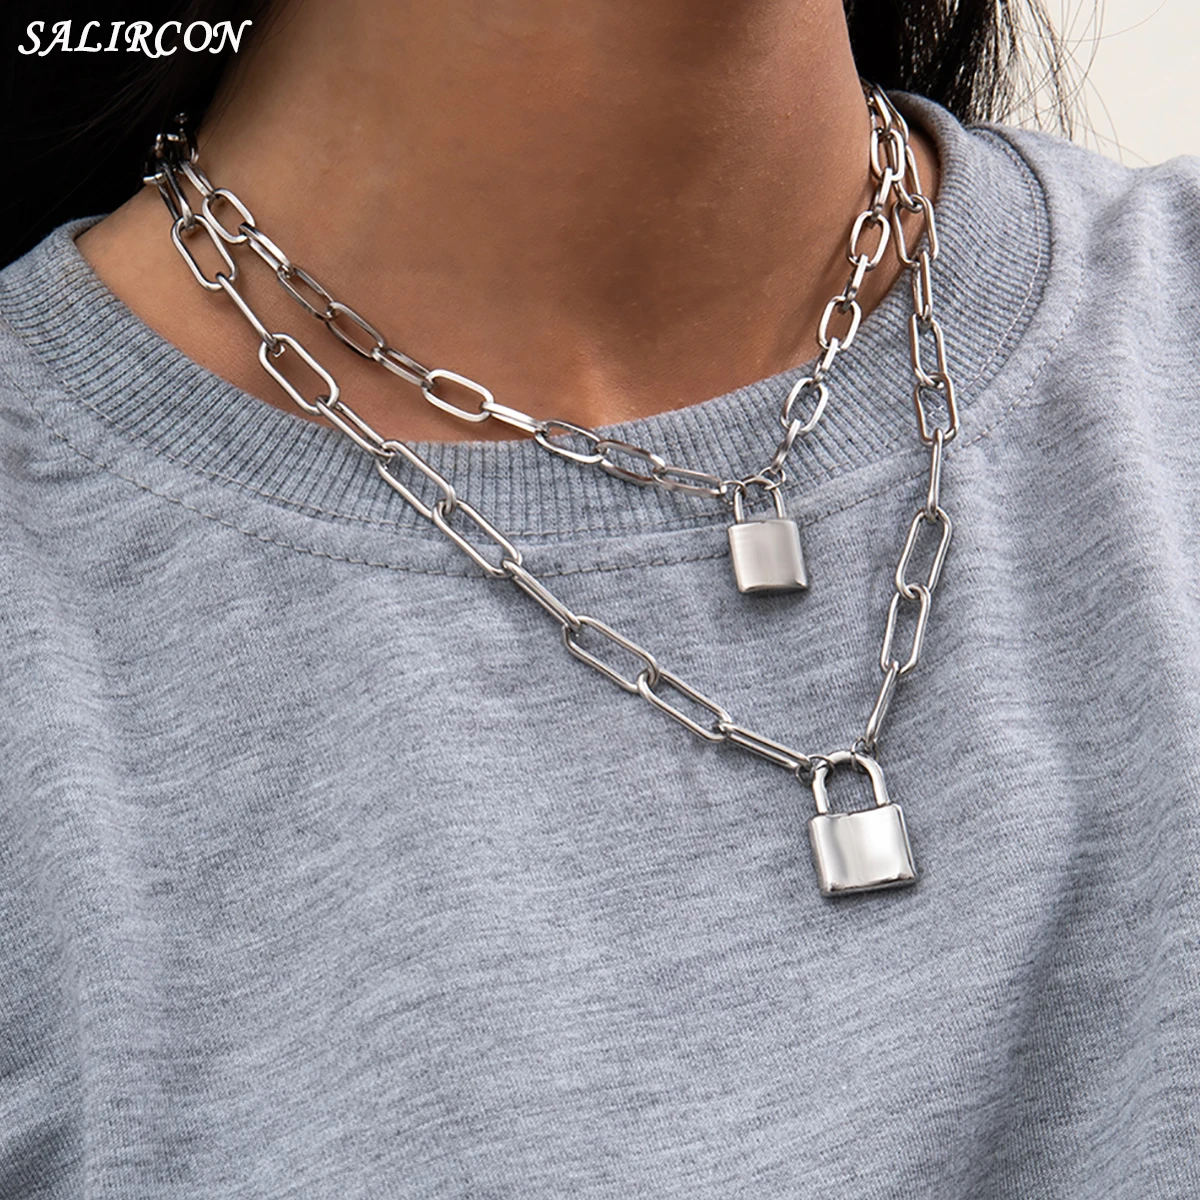 

Goth Stainless Steel Lock Padlock Pendant Necklace for Women Men Punk Geometric Multi Layer Star Coin Chains Necklace Jewelry